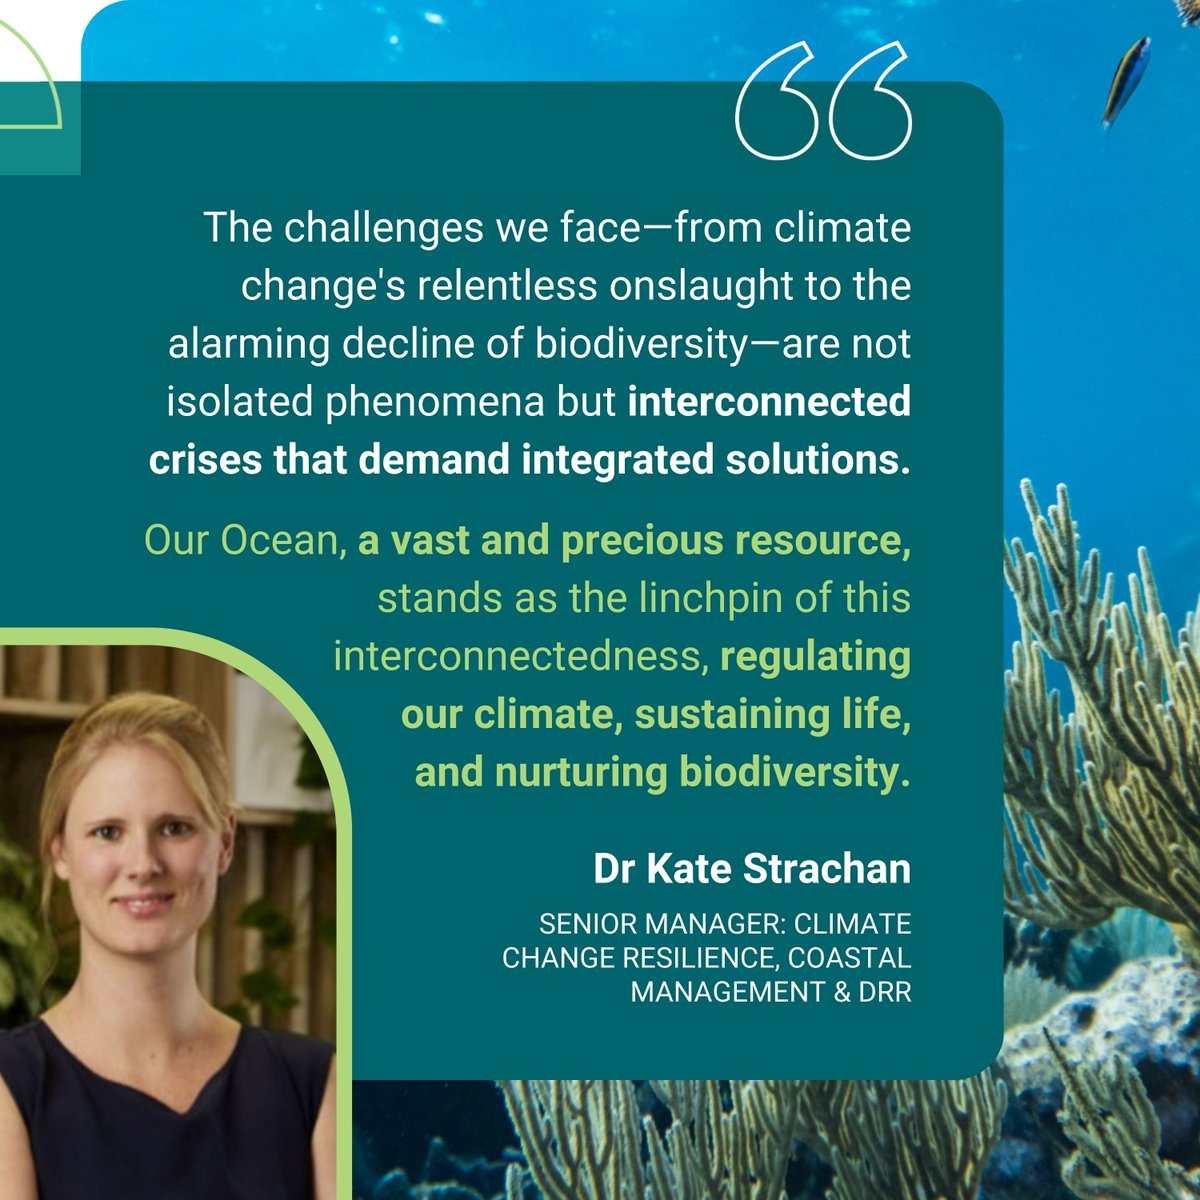 🏙️ Cities with the ocean 🌊 The ocean is not only the cradle of life, it holds the keys to an equitable and sustainable future. See what Dr @KateLStrachan has to say at the @UNOceanDecade Conference satellite event #ForNature #OceanDecade24 🪸 #OceanDecade 🌱 #CitiesWithNature